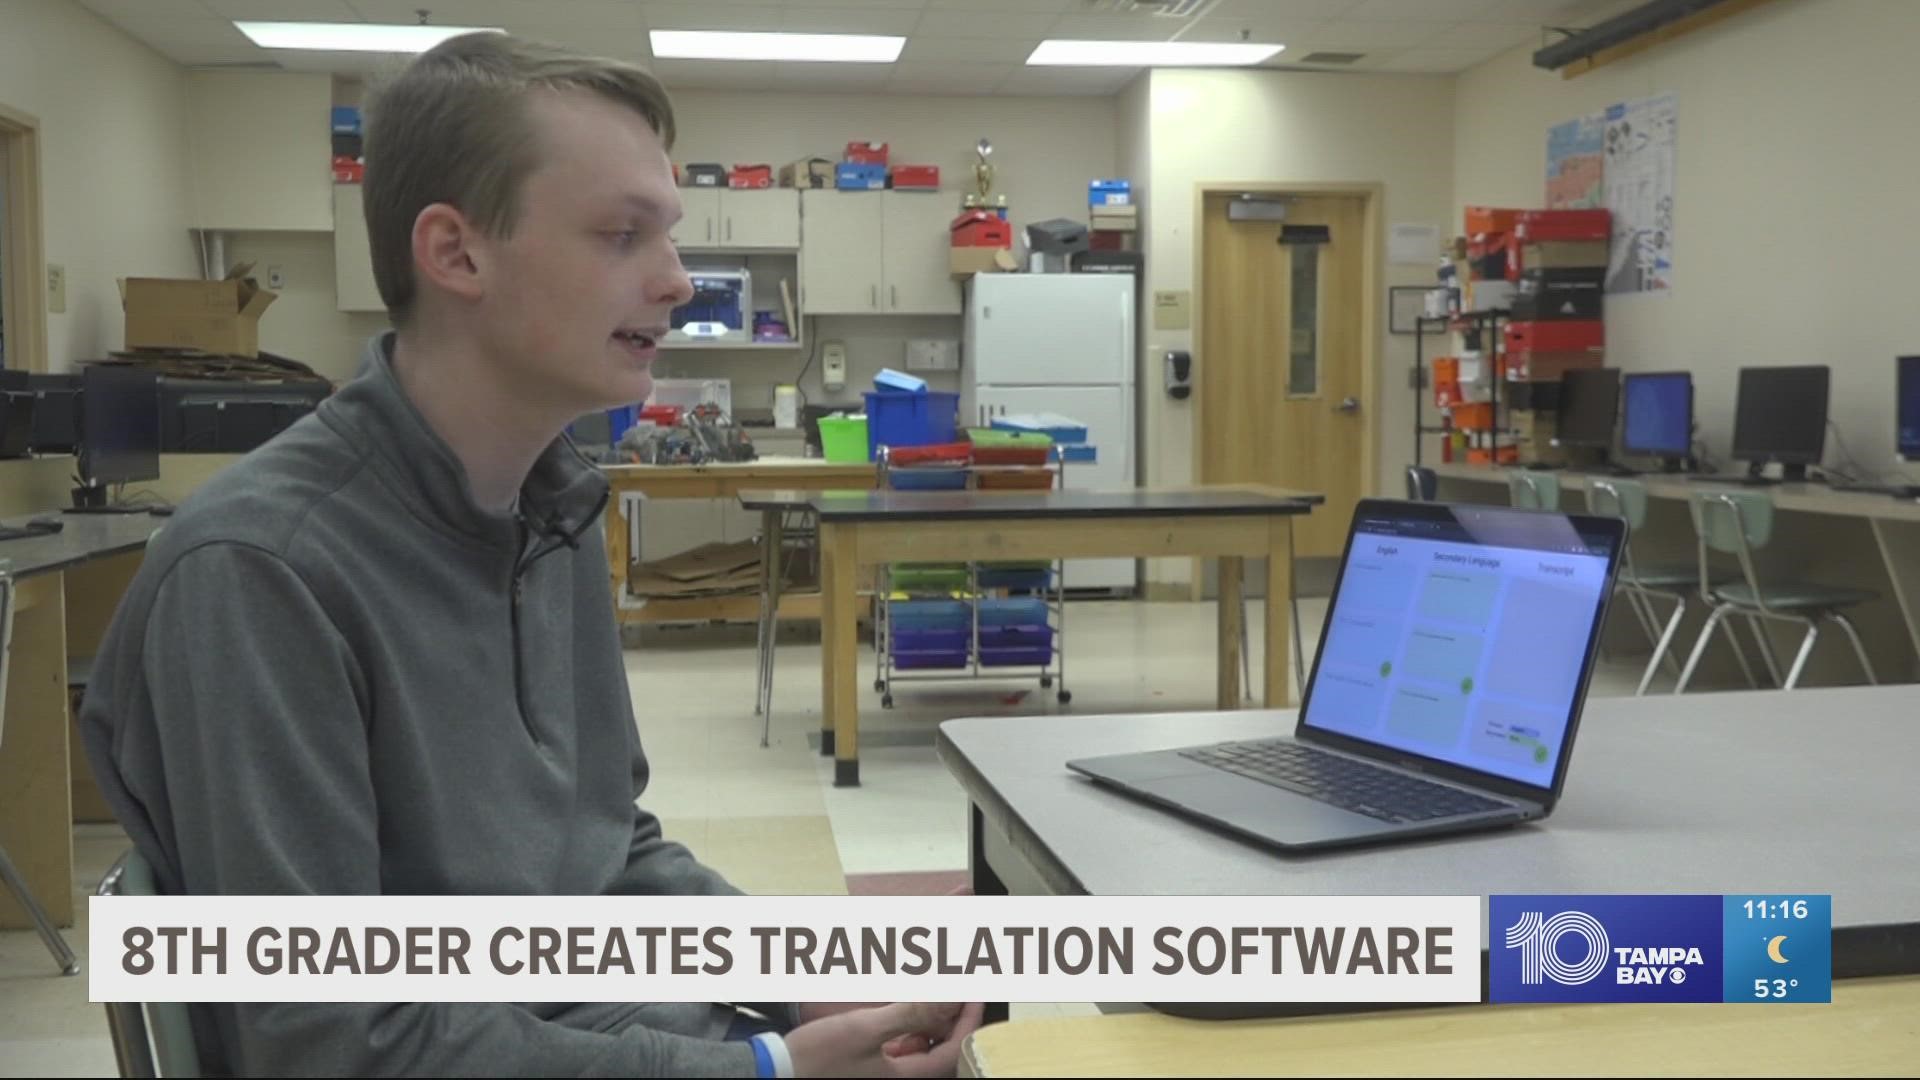 14-year-old Jace Billingsley developed "Class Translate" as a way to help non-English-speaking students with school material. Now, it's available and free to all.